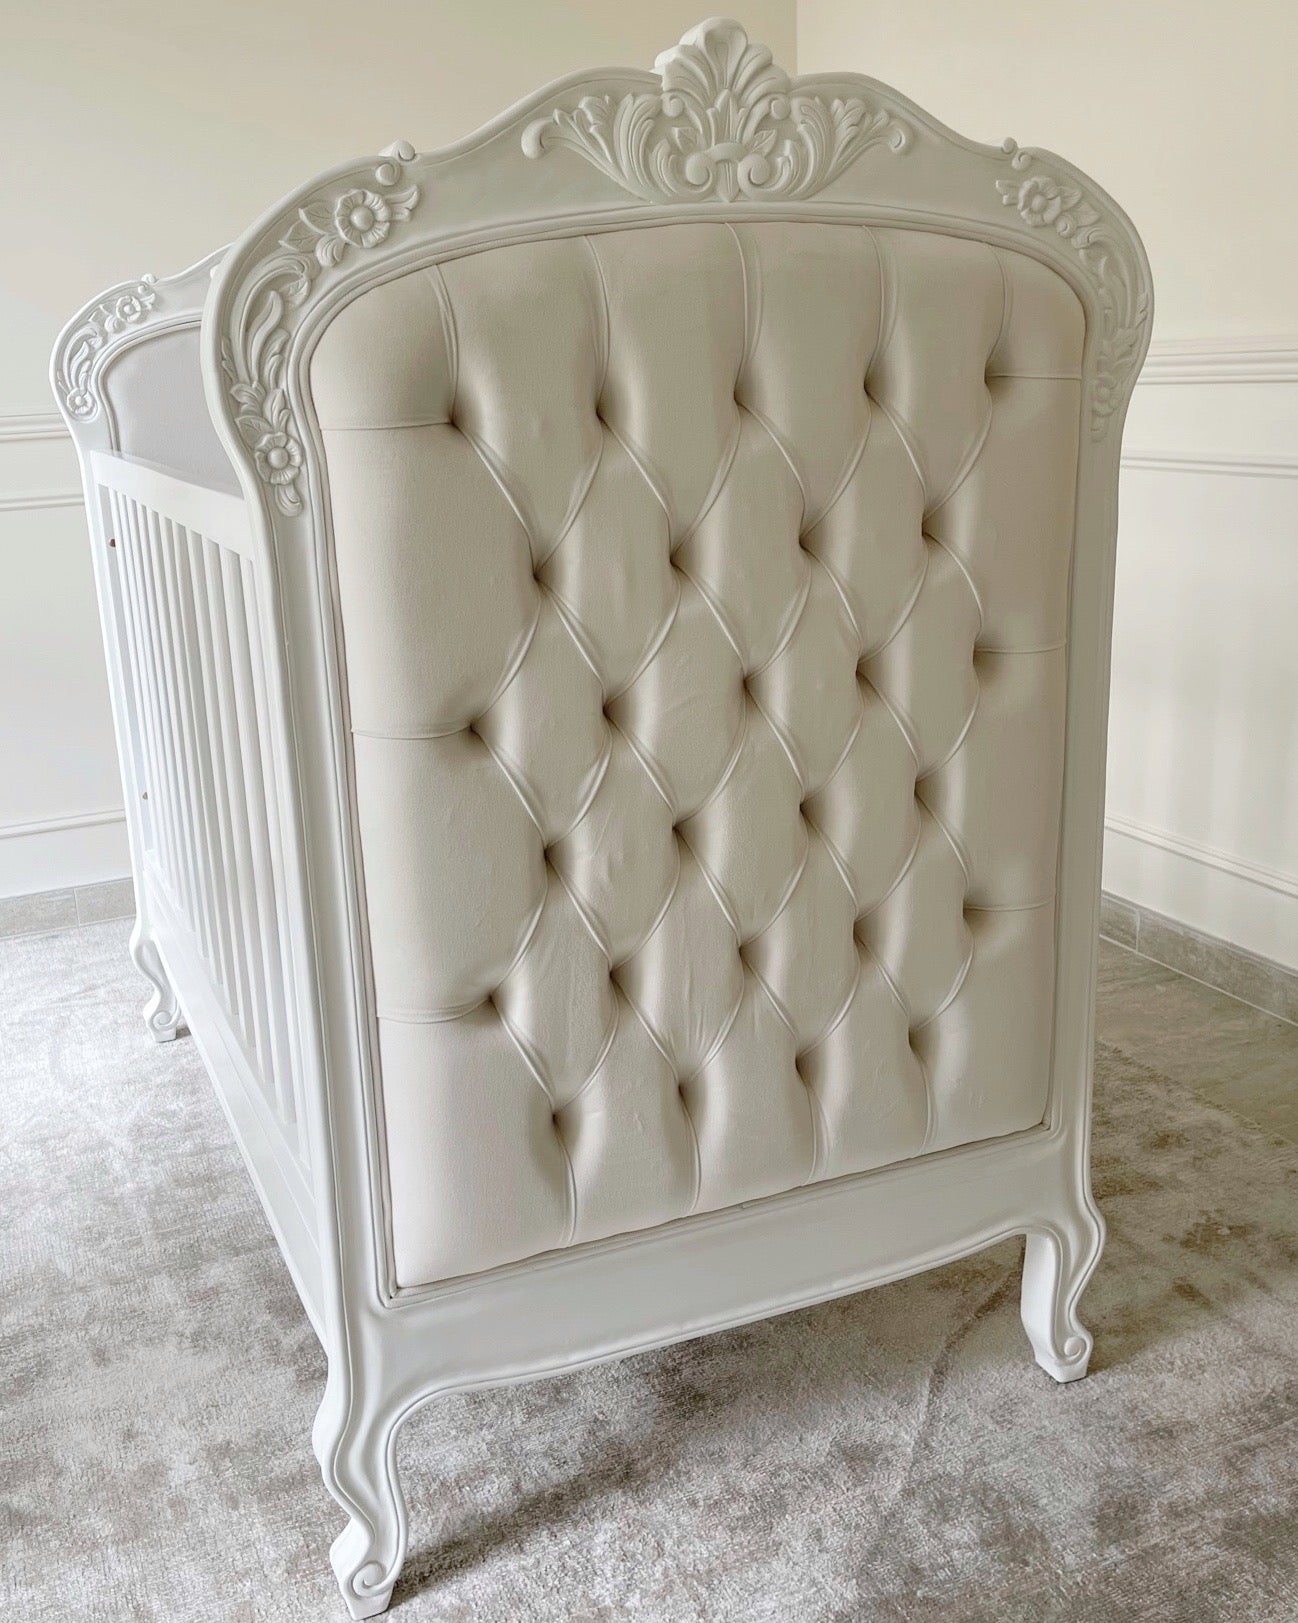 Amelie Tufted Cot